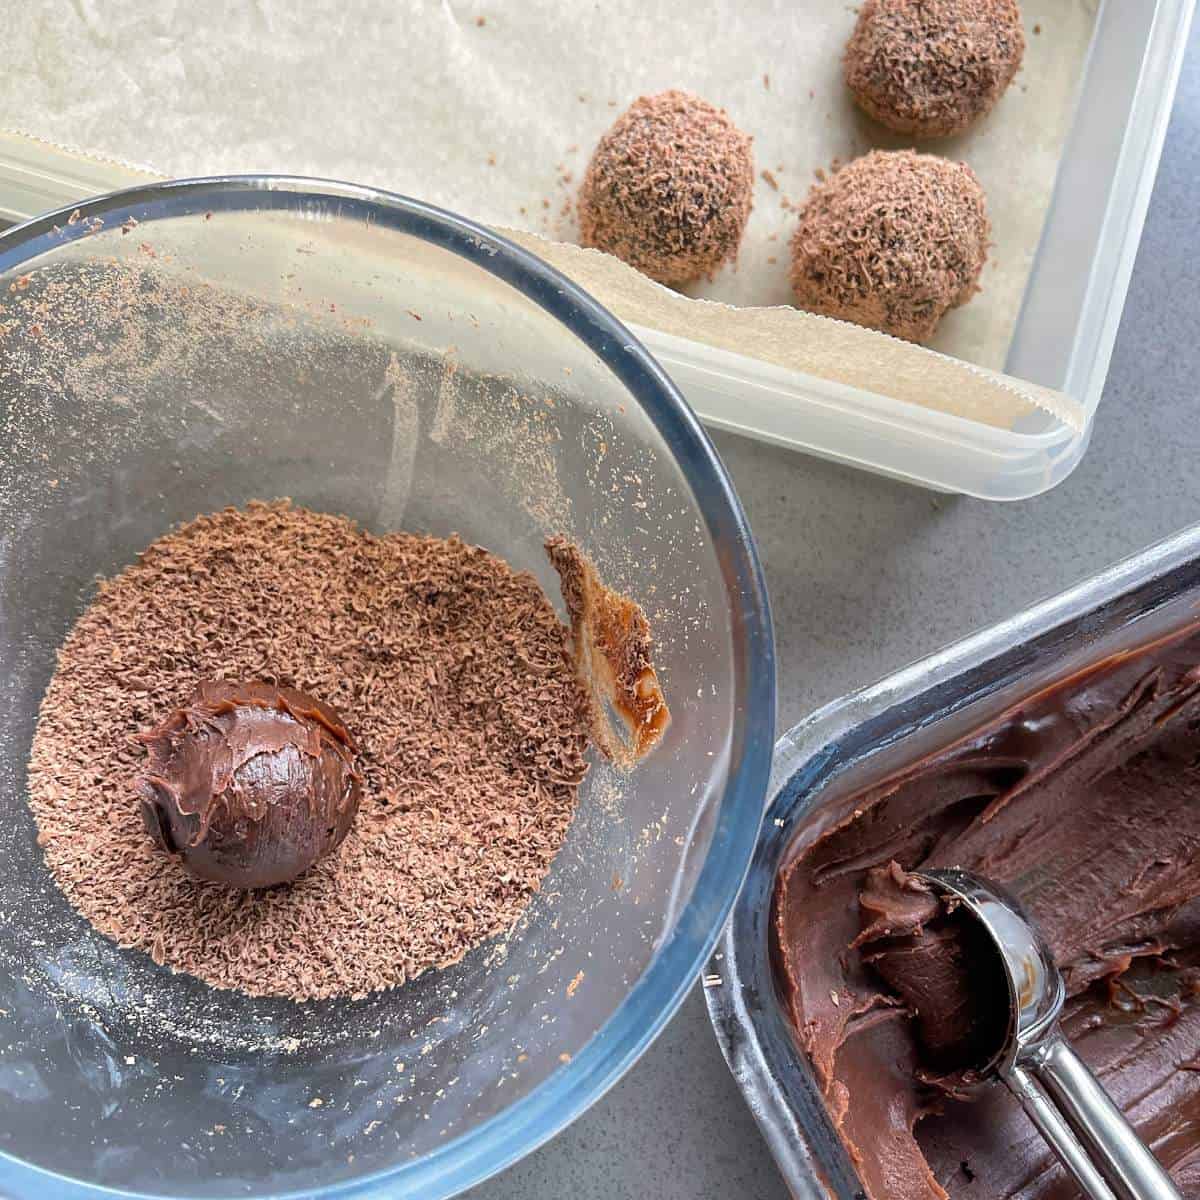 The chocolate bailey truffle mixture, shredded chocolate in a separate glass bowl with one truffle being rolled through it covering the outside of the truffle.